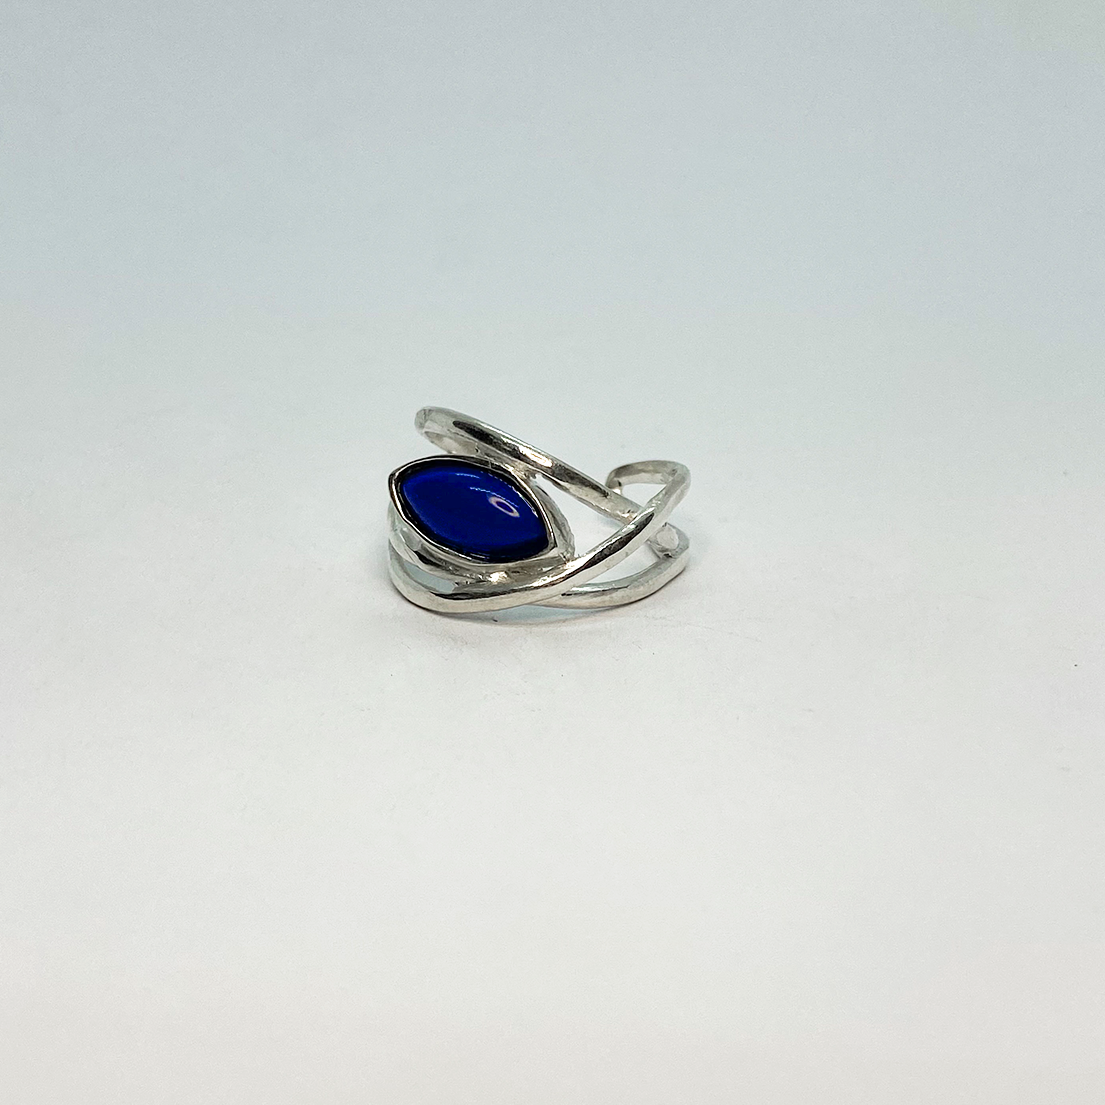 The Azul ring is a handmade piece made of 925 sterling silver. It features a semi-precious stone called blue lapis. 